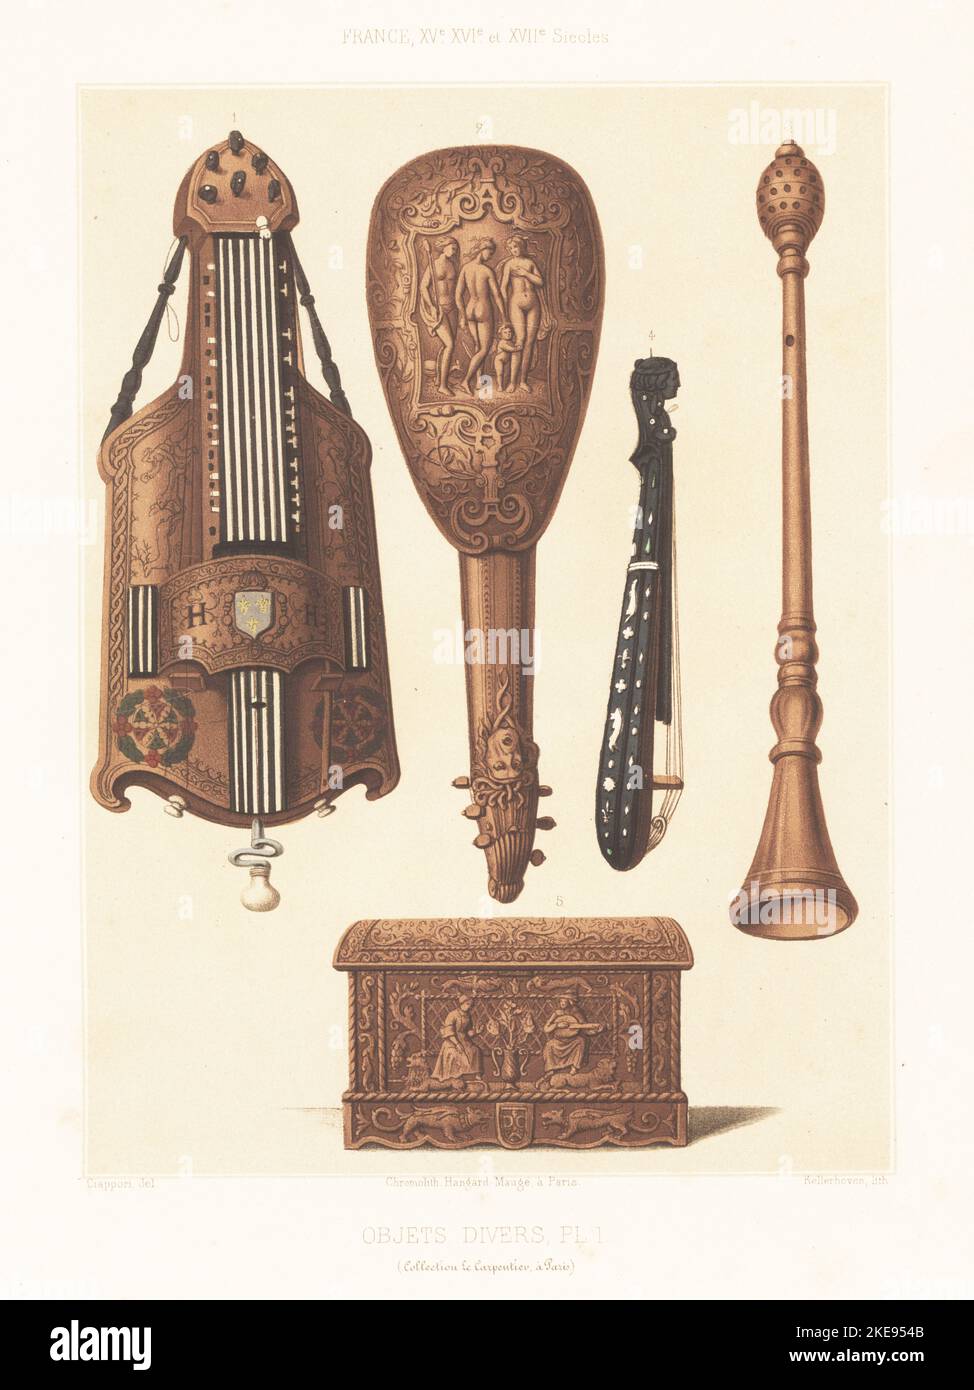 Musical instruments, France, 15th to 17th century. Vielle or hurdy-gurdy owned by Catherine de Medicis 1, Italian mandolin 2, flute 3, pochette or pocket fiddle 4, and carved wooden box 5. Coffret et instruments de musique, XVe au XVII siecles. From the Carpentier collection. Chromolithograph by Franz Kellerhoven after an illustration by Claudius Joseph Ciappori from Charles Louandre’s Les Arts Somptuaires, The Sumptuary Arts, Hangard-Mauge, Paris, 1858. Stock Photo